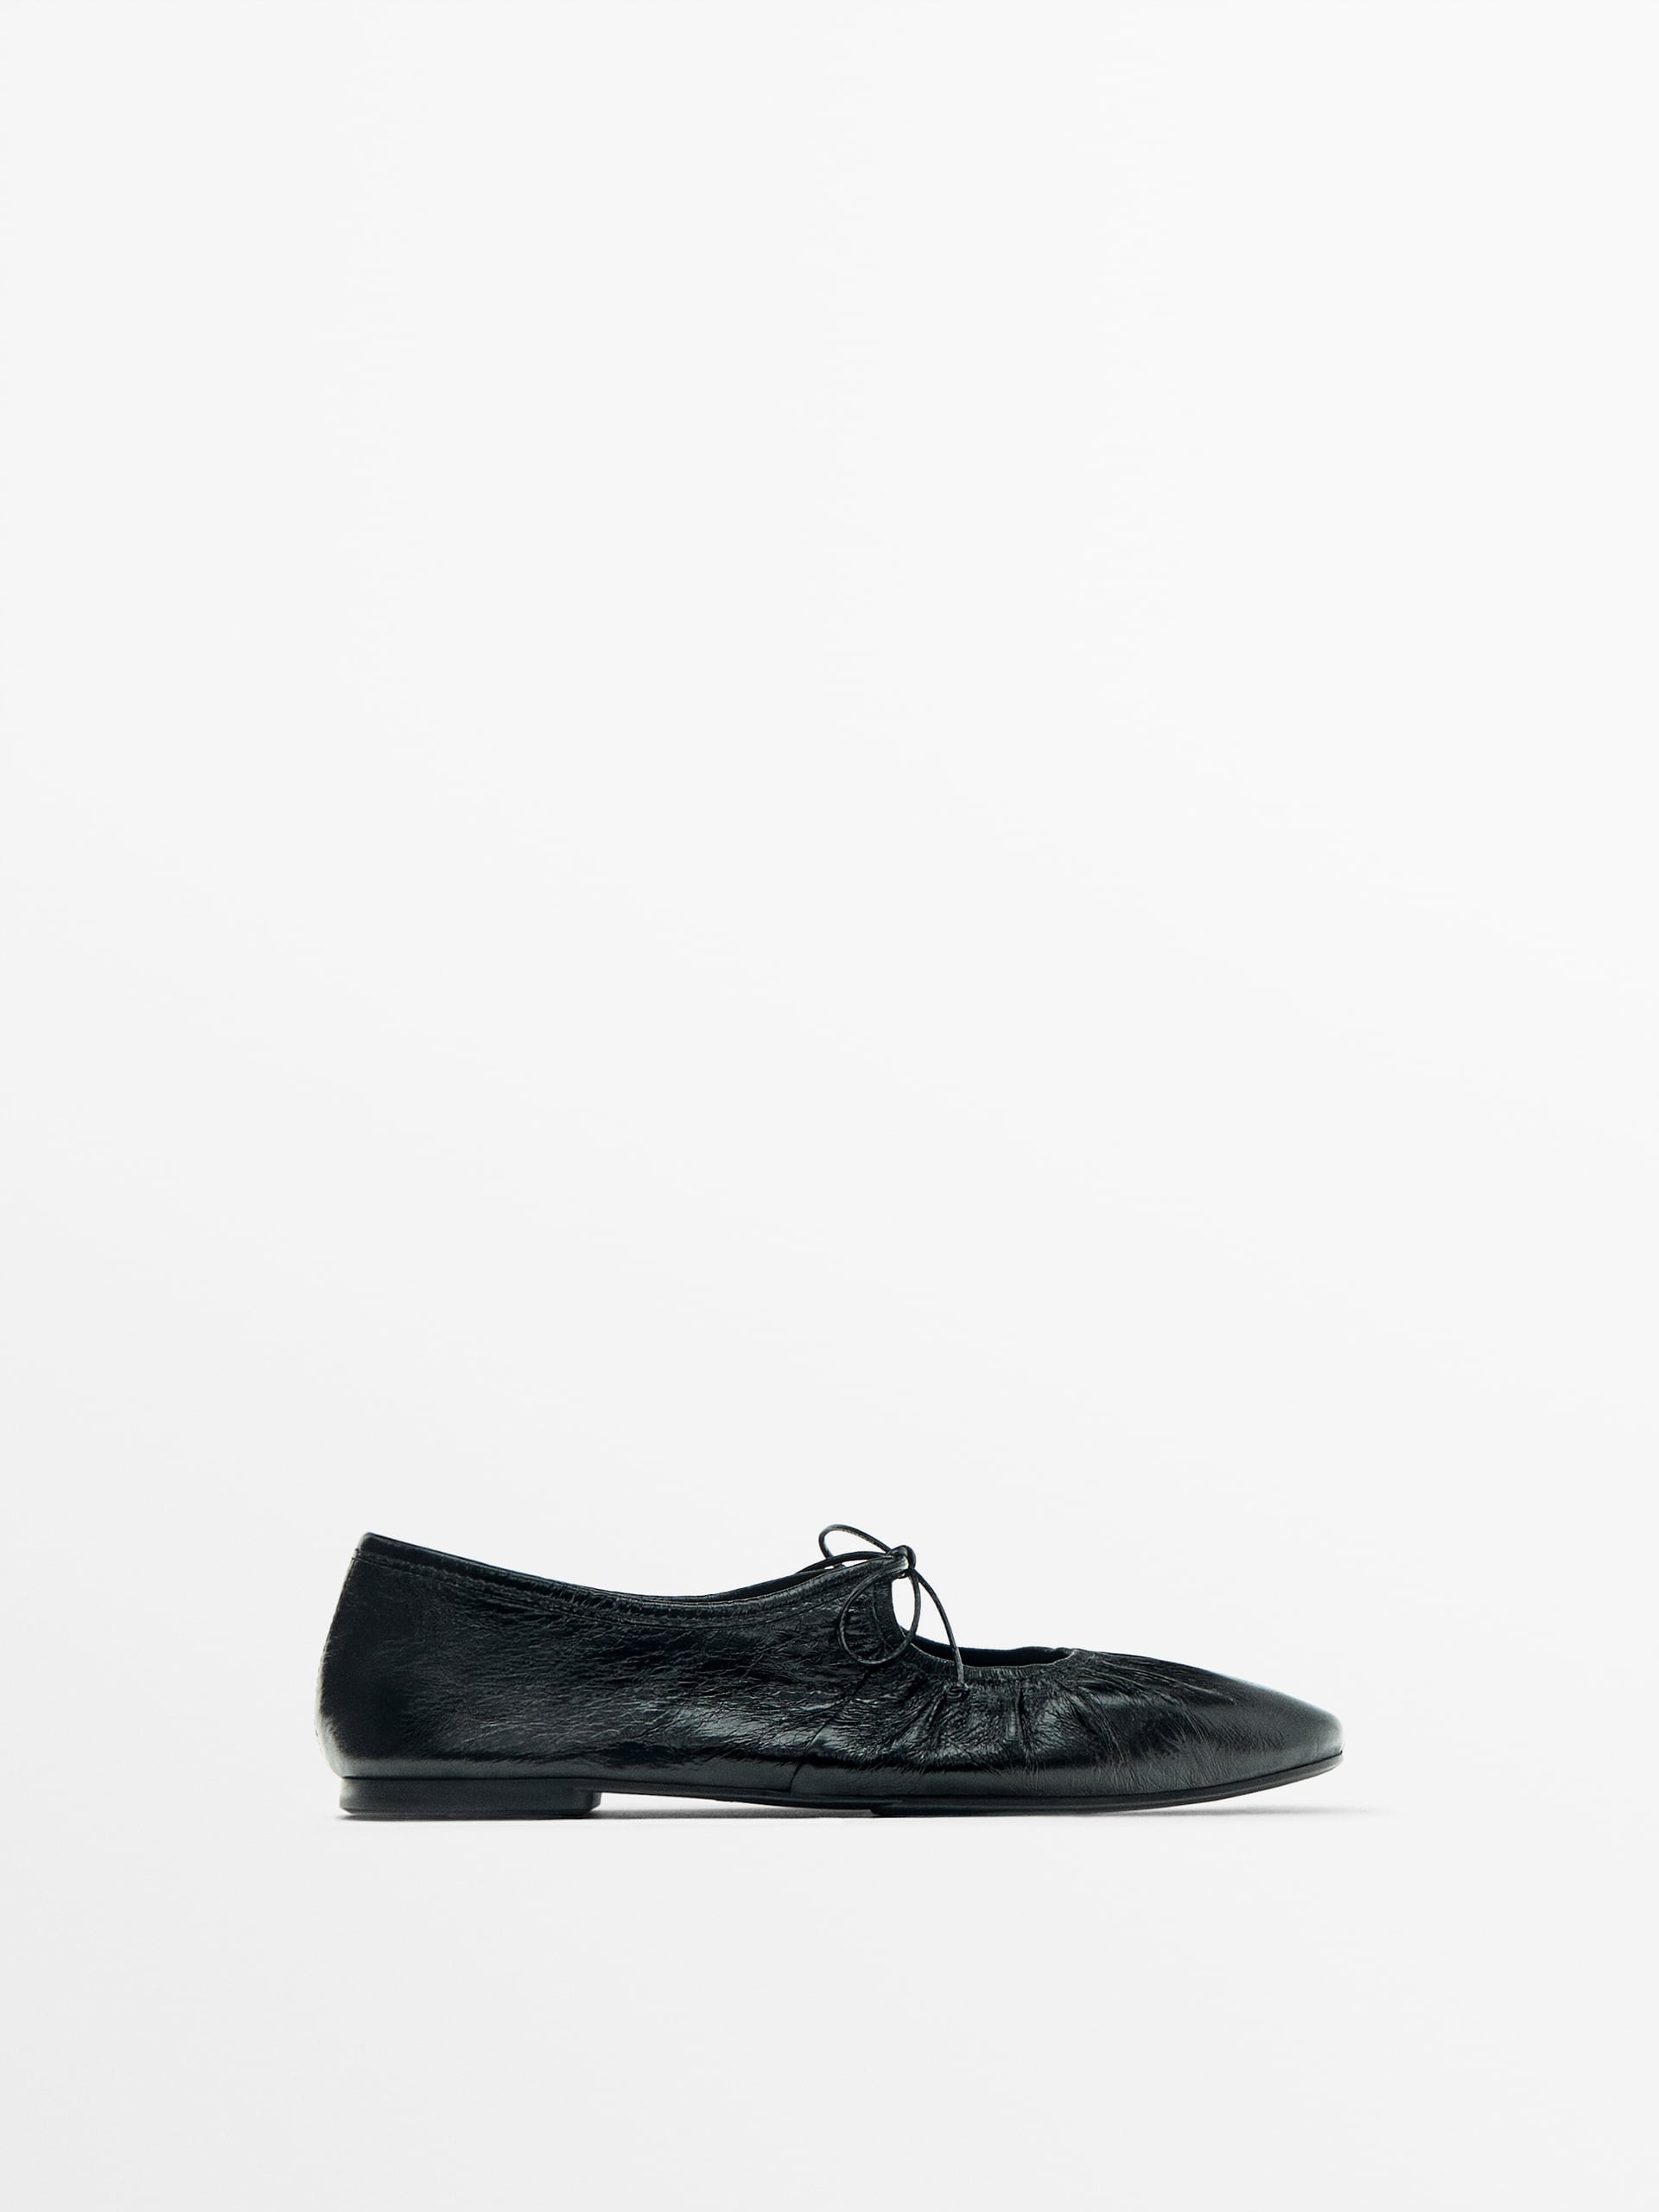 Massimo Dutti + Tied Leather Ballet Flats